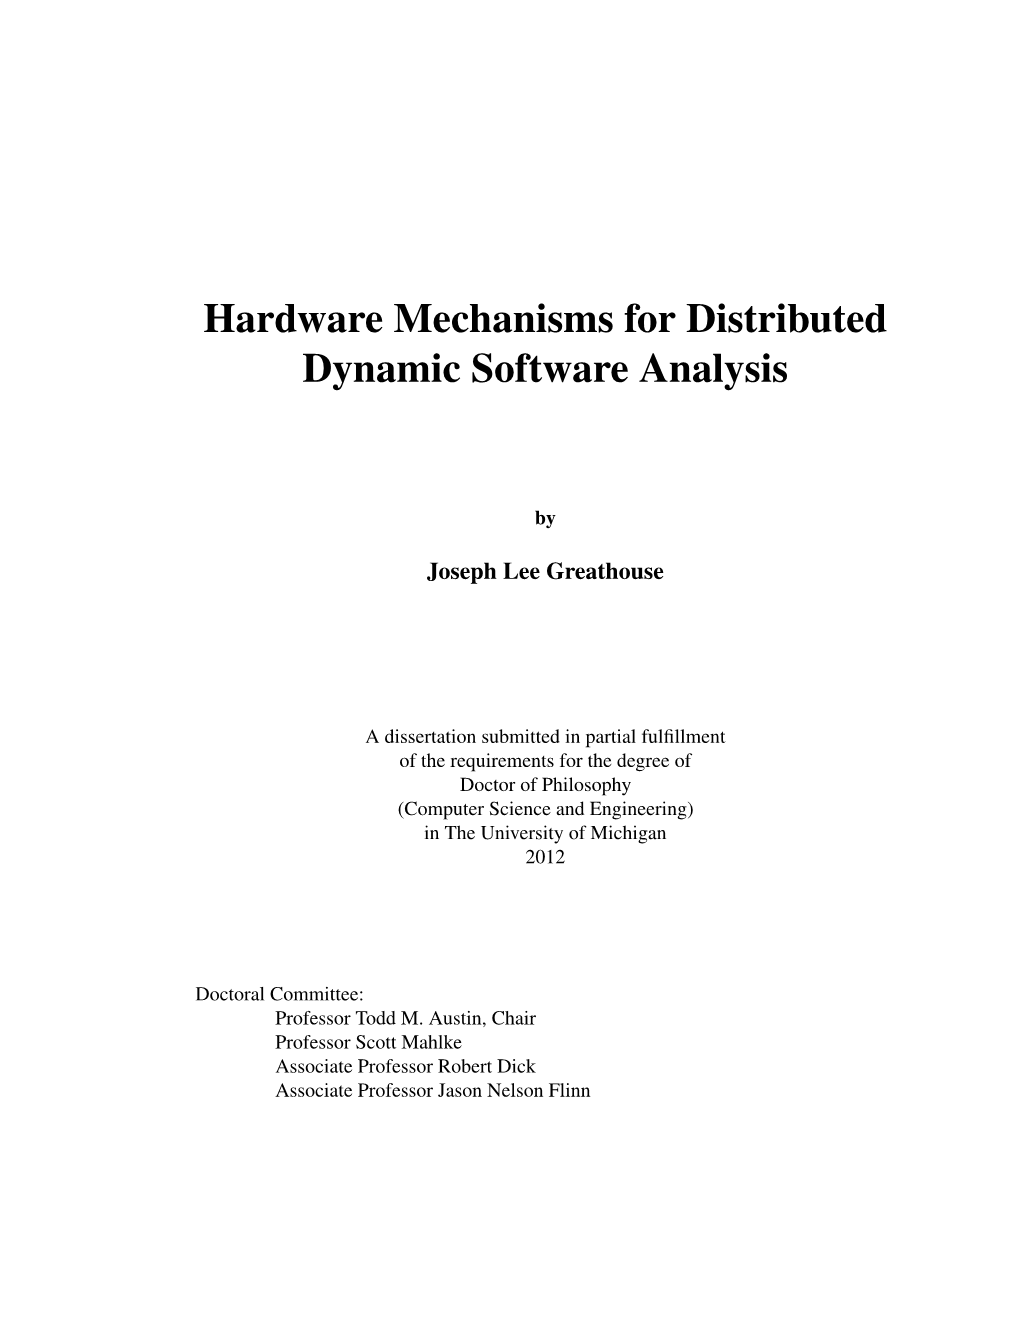 Hardware Mechanisms for Distributed Dynamic Software Analysis